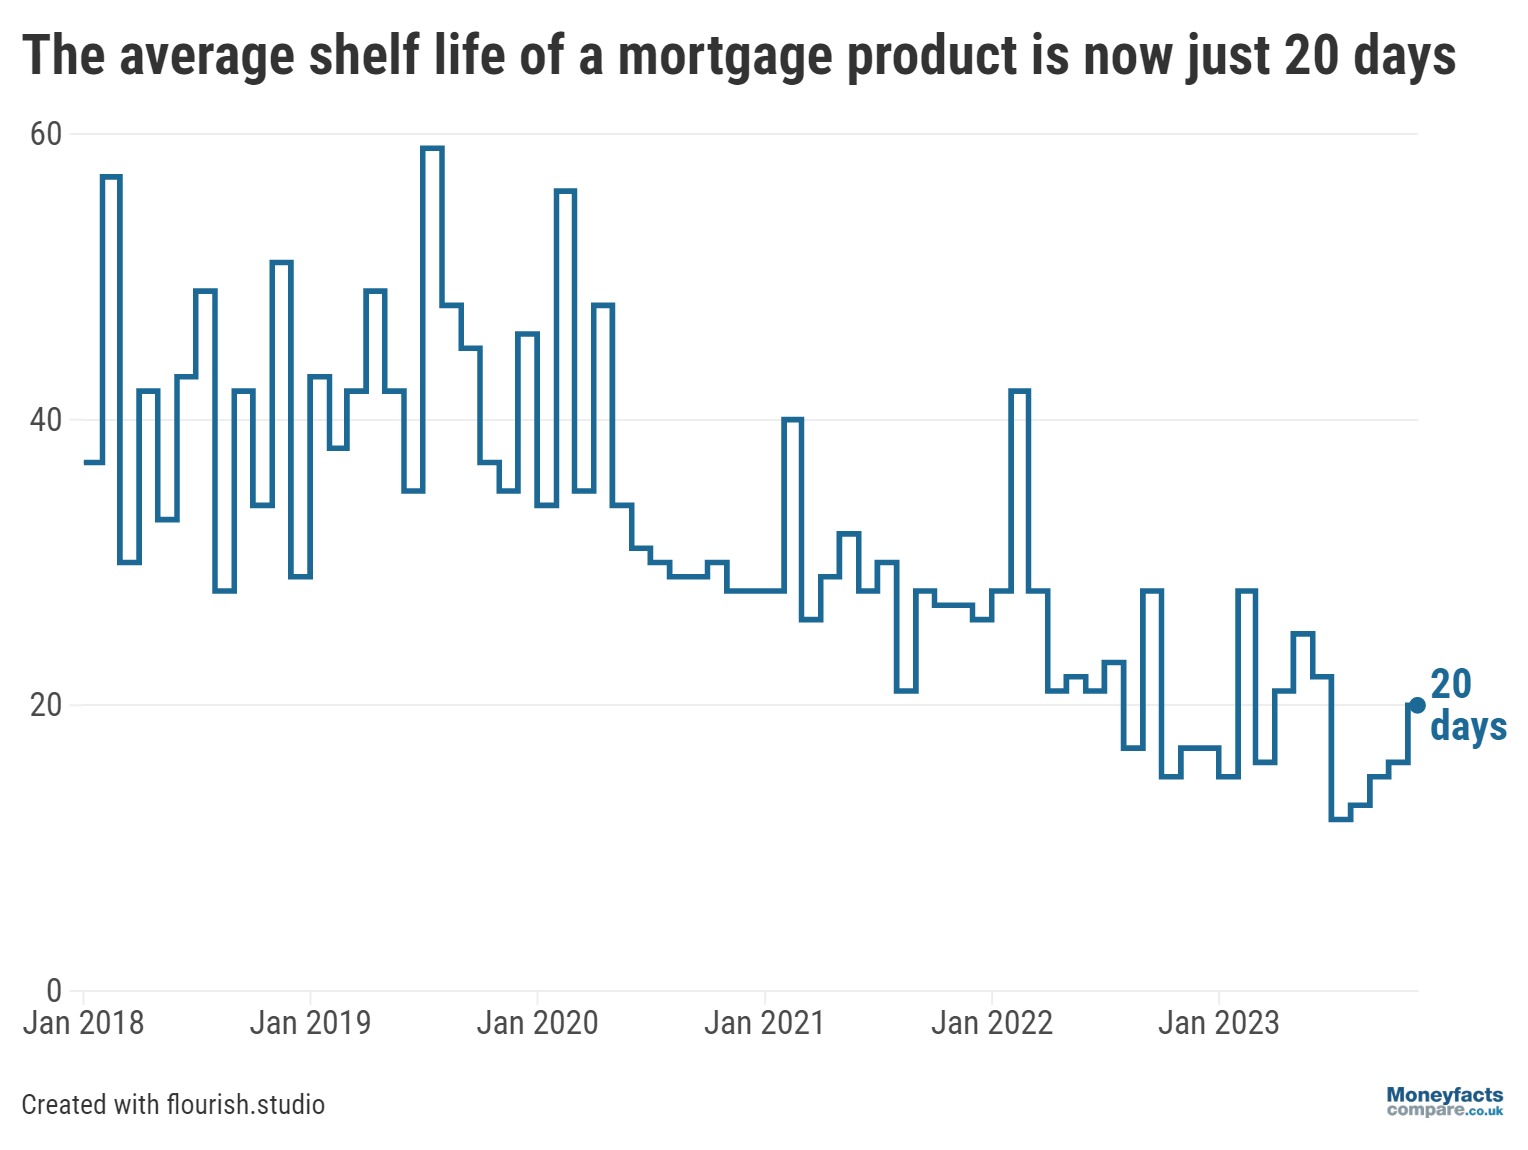 Average shelf life of a mortgage product rose to 20 days in November 2023